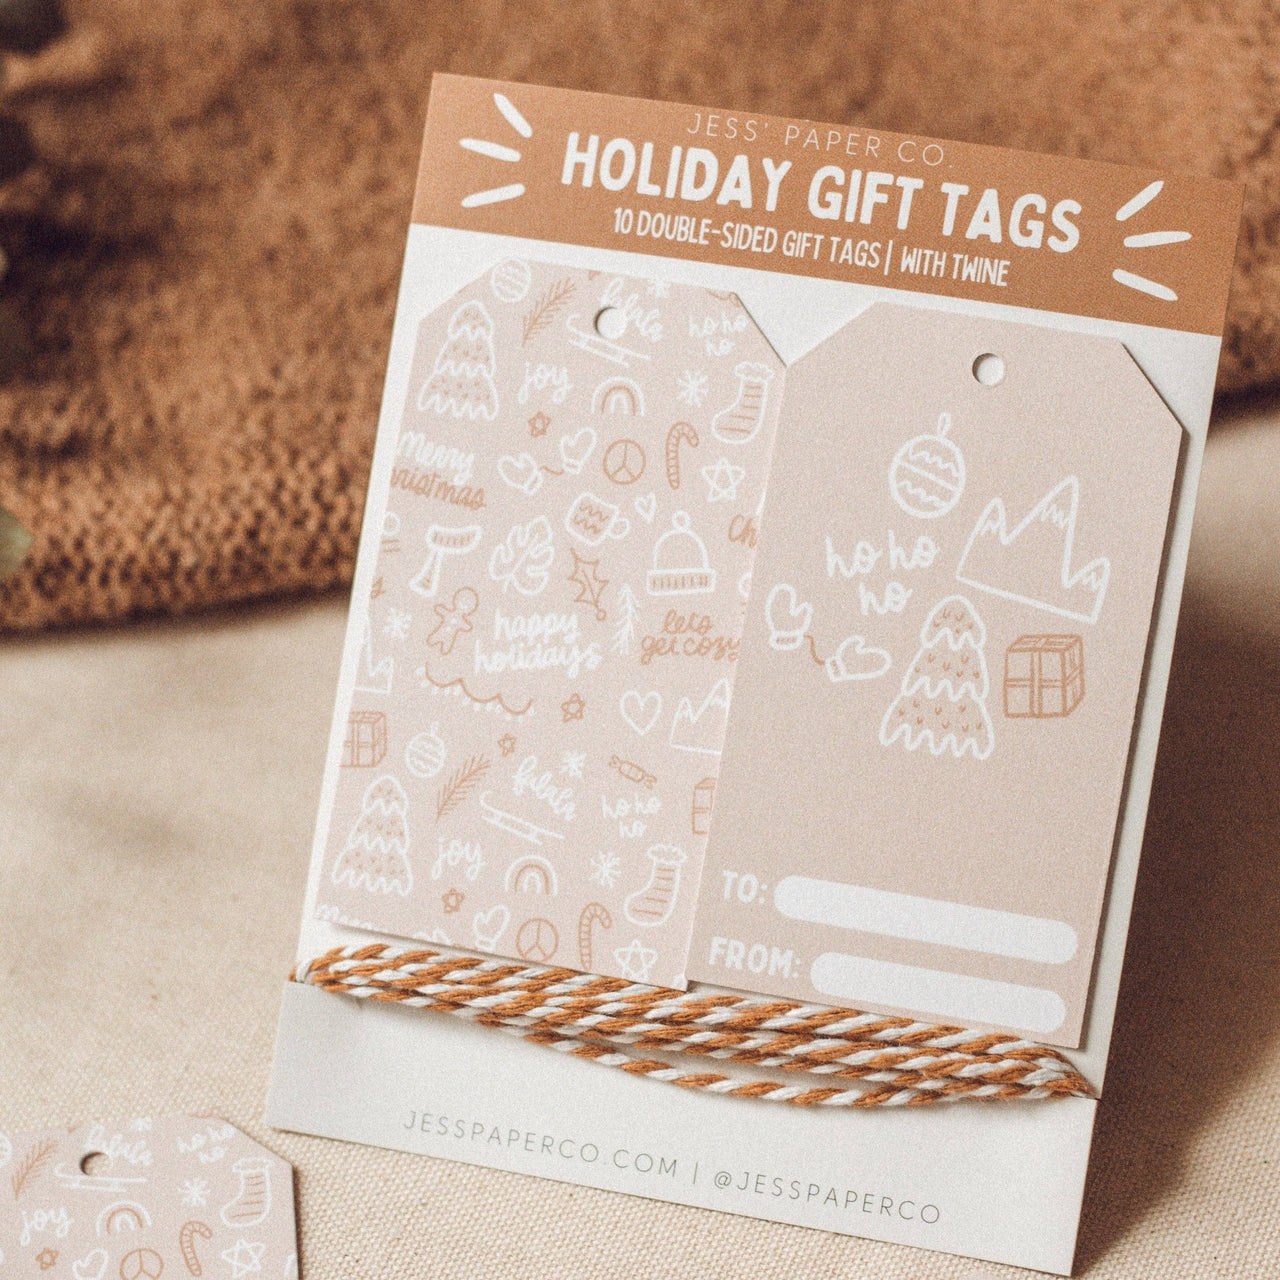 Pink Holiday Gift Tags with Twine by Jess' Paper Co.